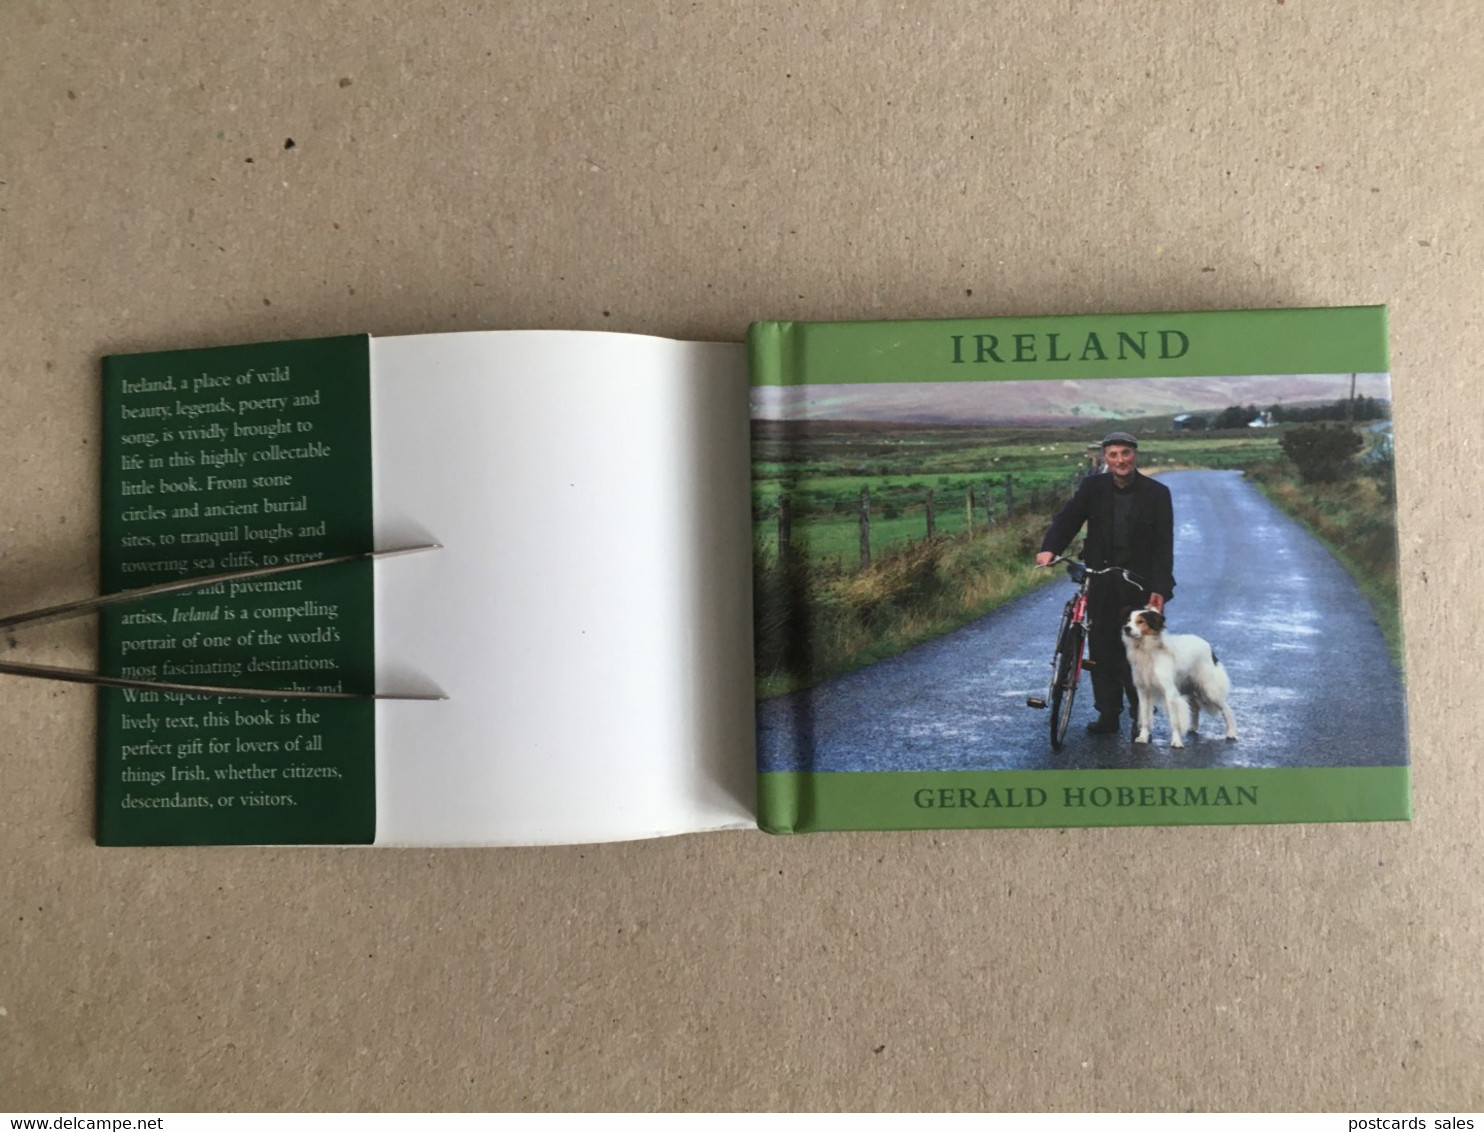 Gerald Hoberman - Ireland - Illustrated Album And Text - Size Of The Book 100/78 Mm - 80 Pages - Europe